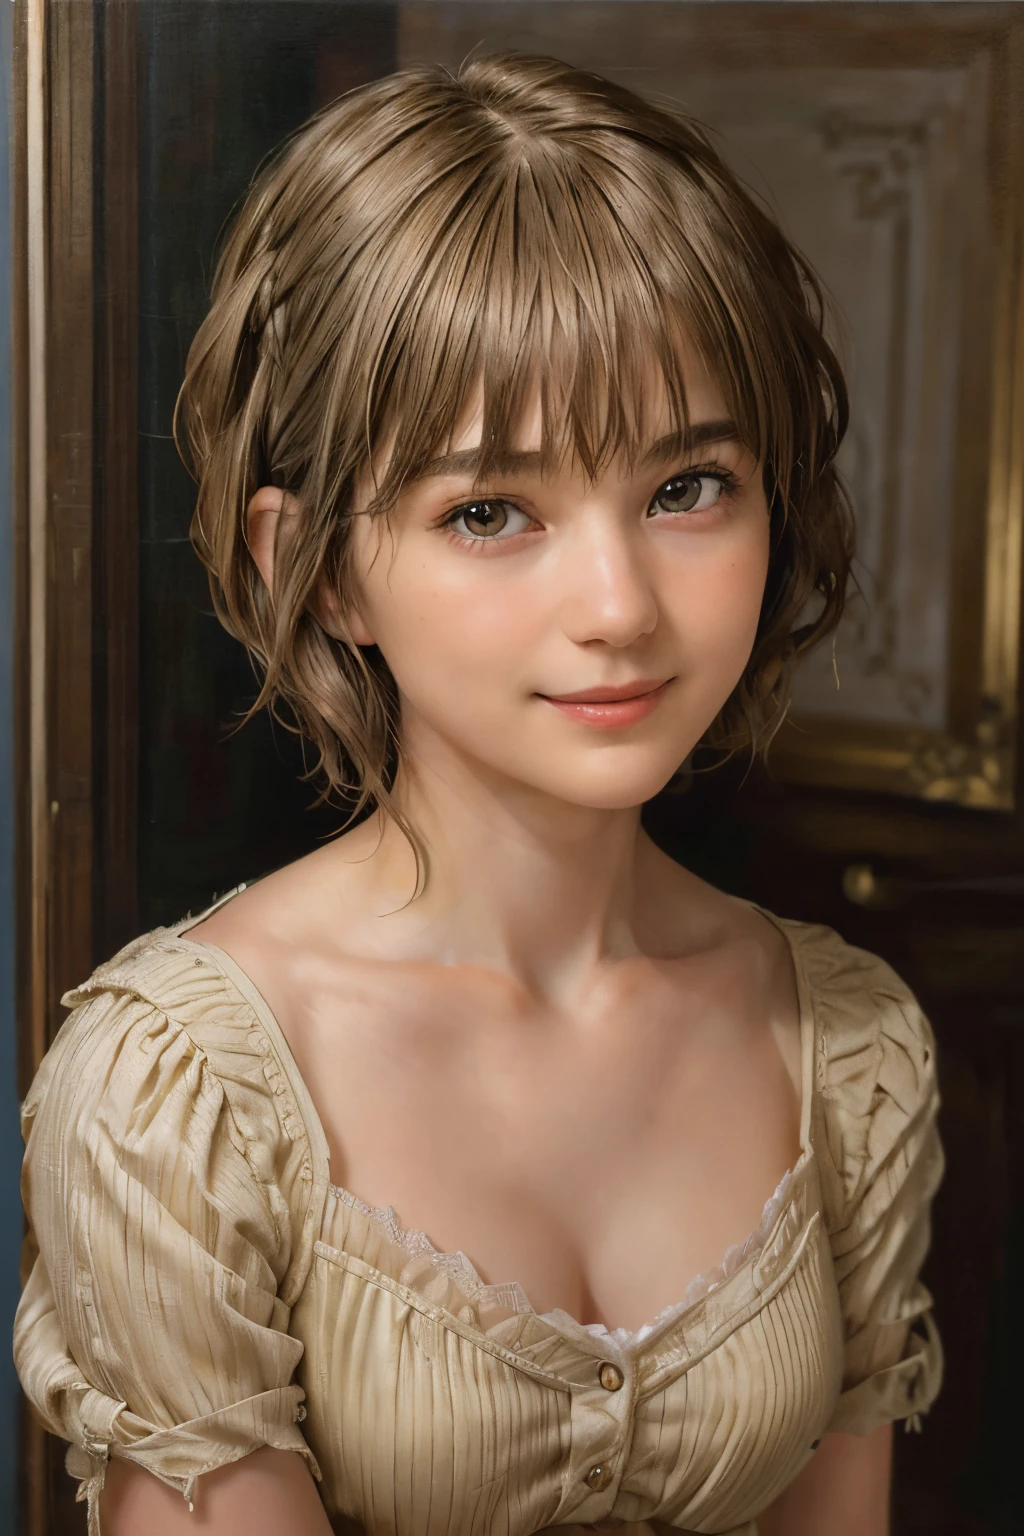 102
(a 20 yo woman,is standing), (A hyper-realistic), (high-level image quality), ((beautiful hairstyle 46)), ((short-hair:1.46)), (Gentle smile), (Keep your mouth shut), (trompe l'oeil), ((trickart))